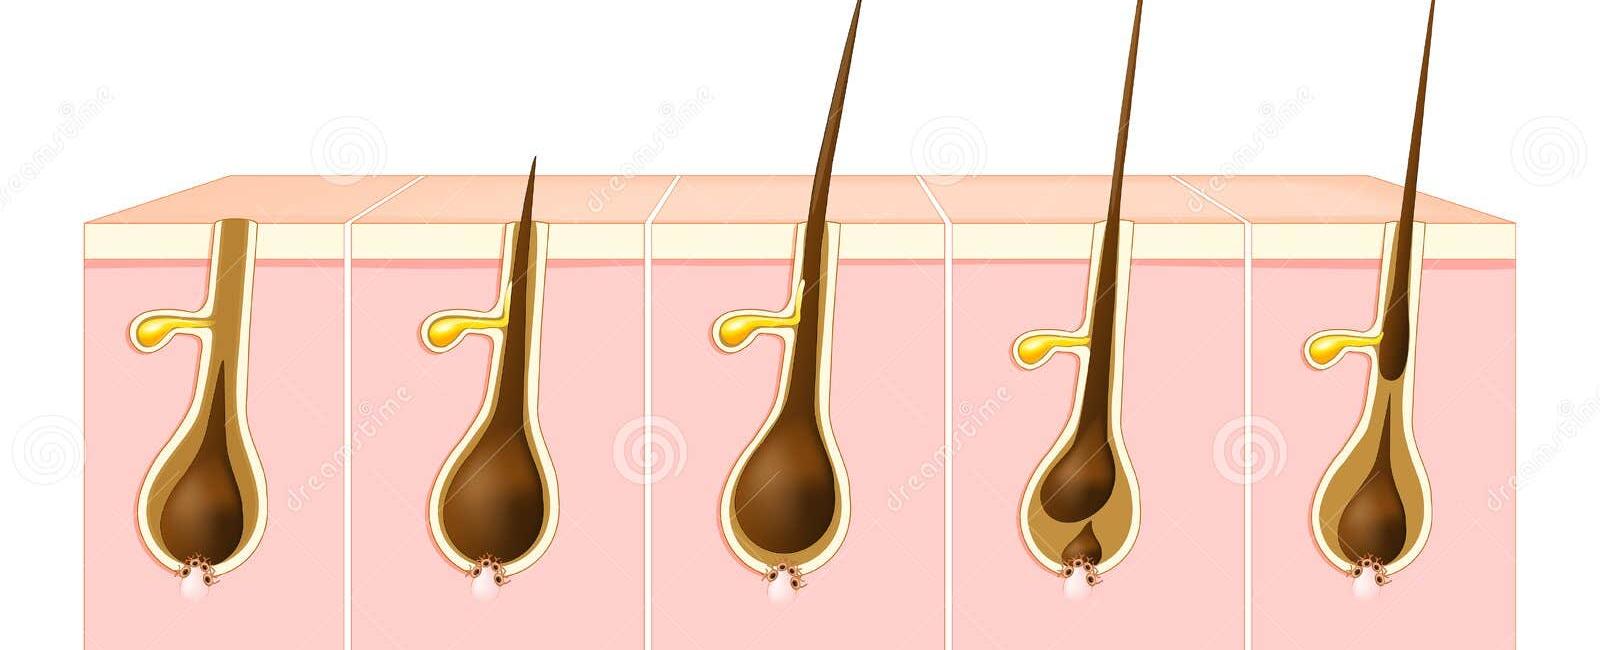 The final phase of hair growth telogen is when hair growth is completed and the hair fiber falls out generally 10 15 of the hair on a human head is in this phase at any given time which lasts for 100 days before the first phase anagen begins again